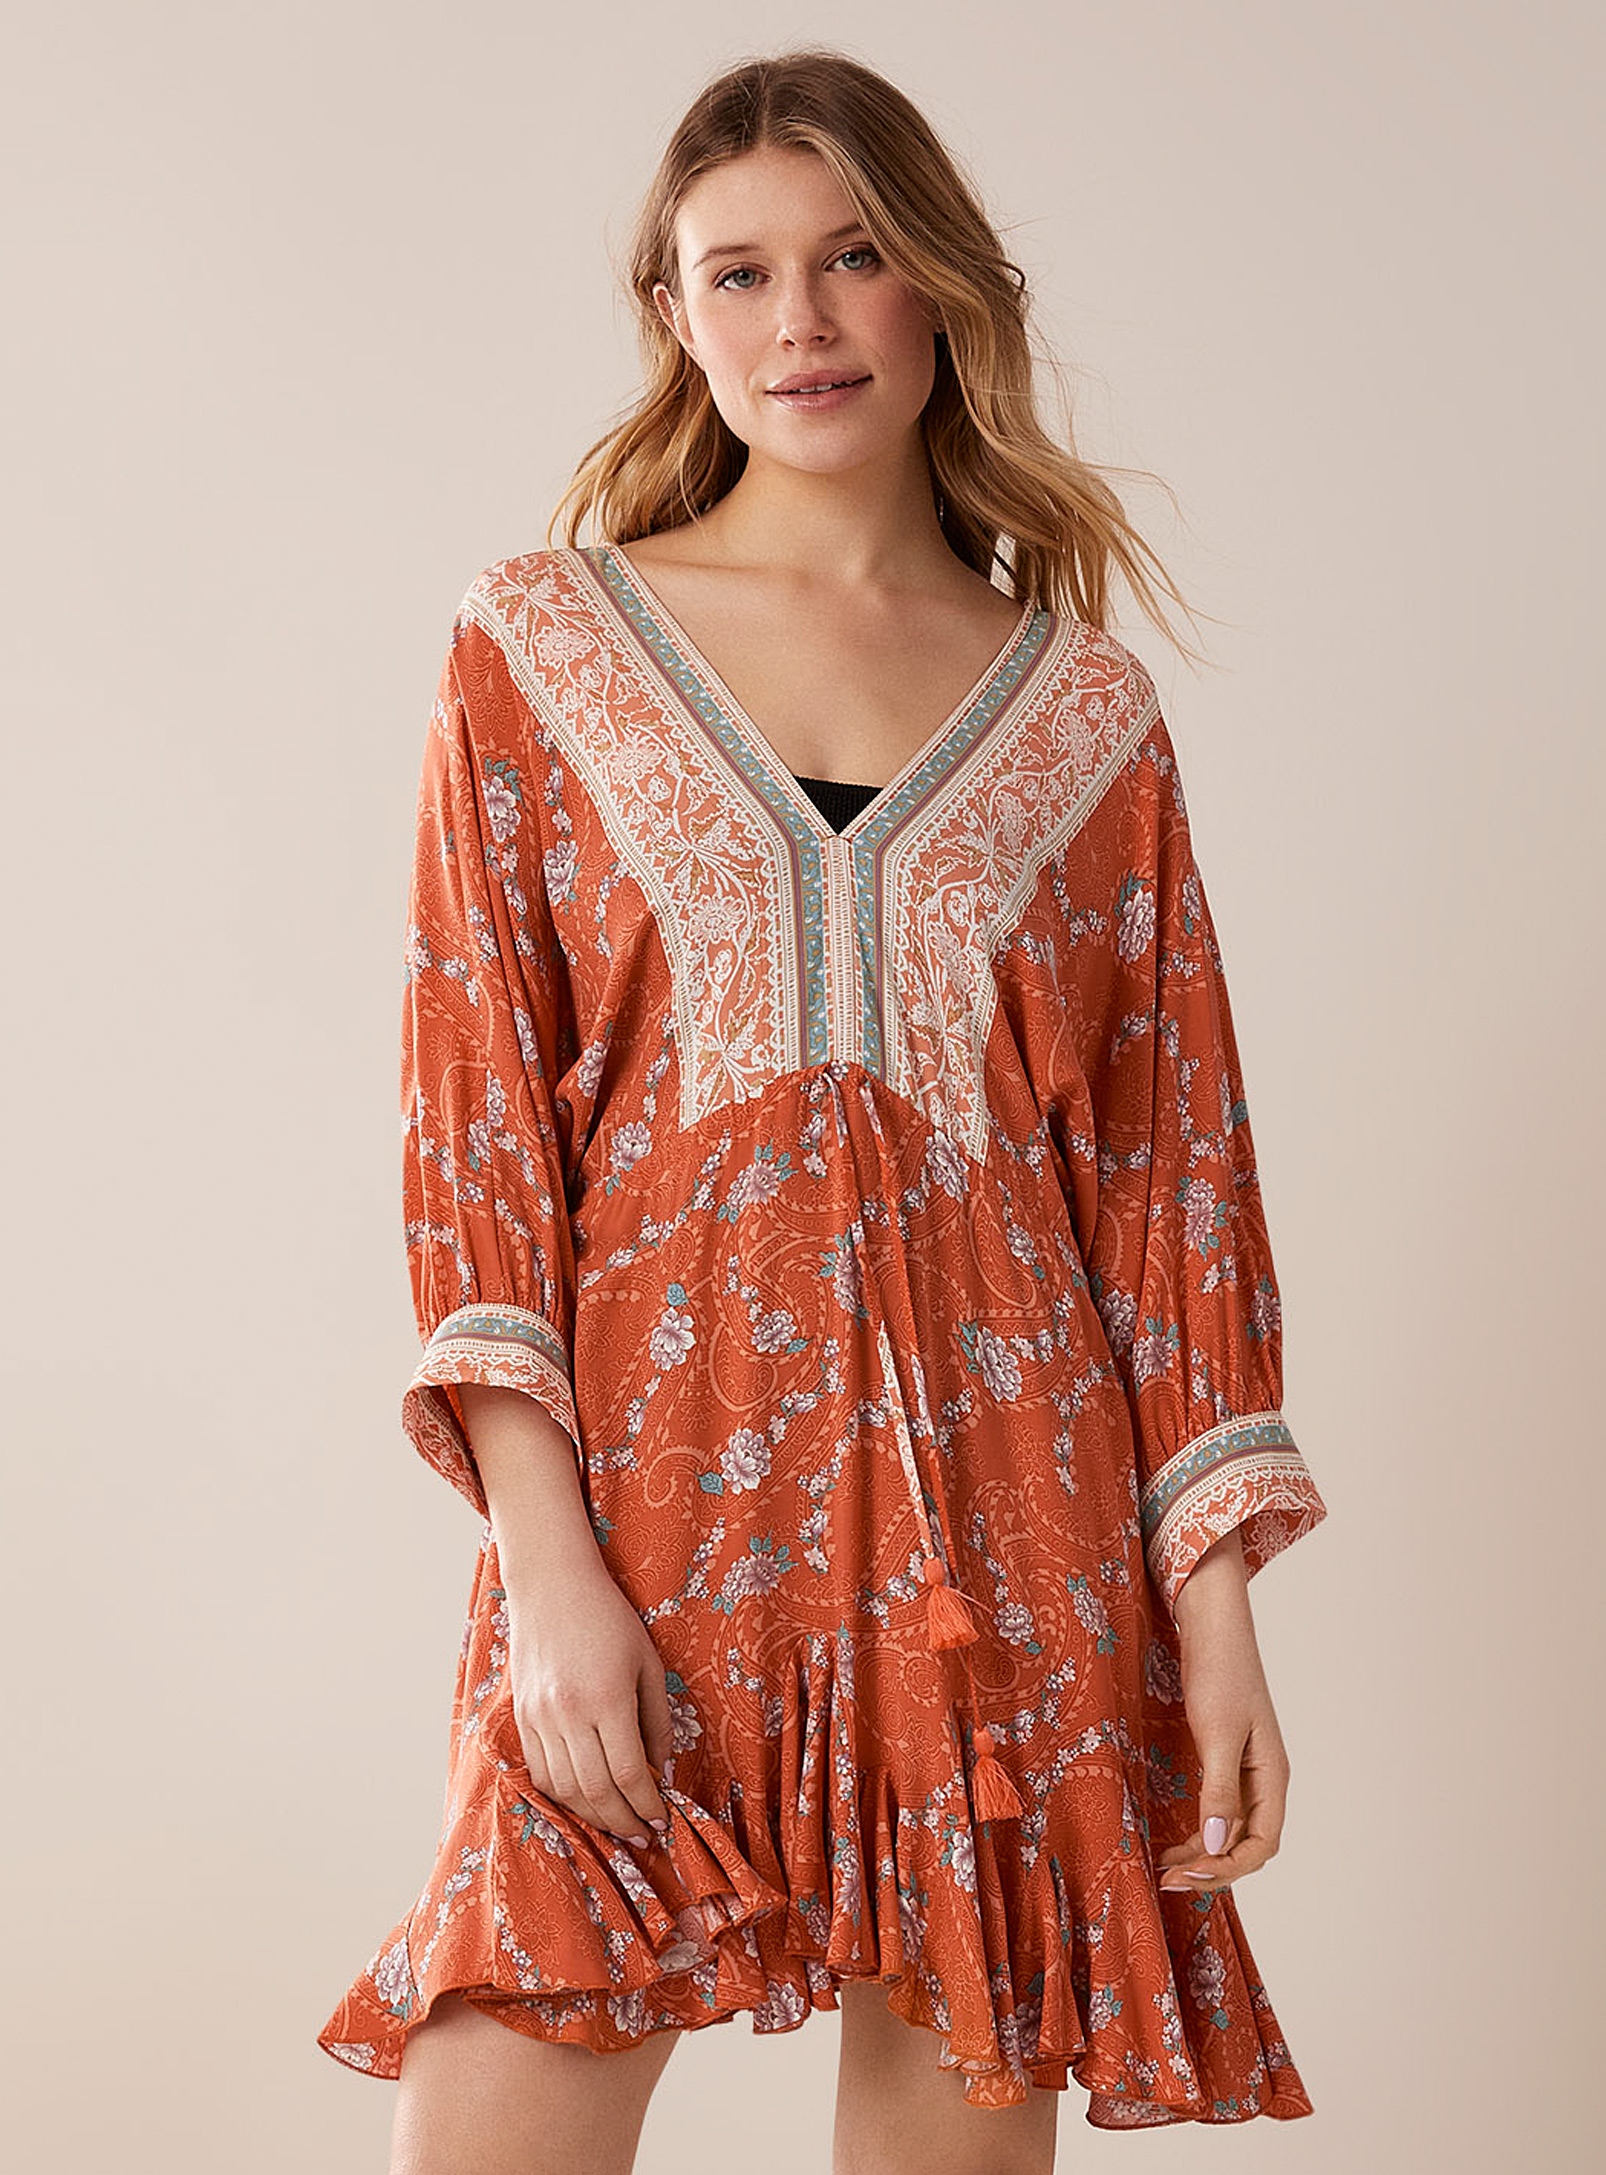 Aakaa Floral Embellishment Dress In Patterned Orange